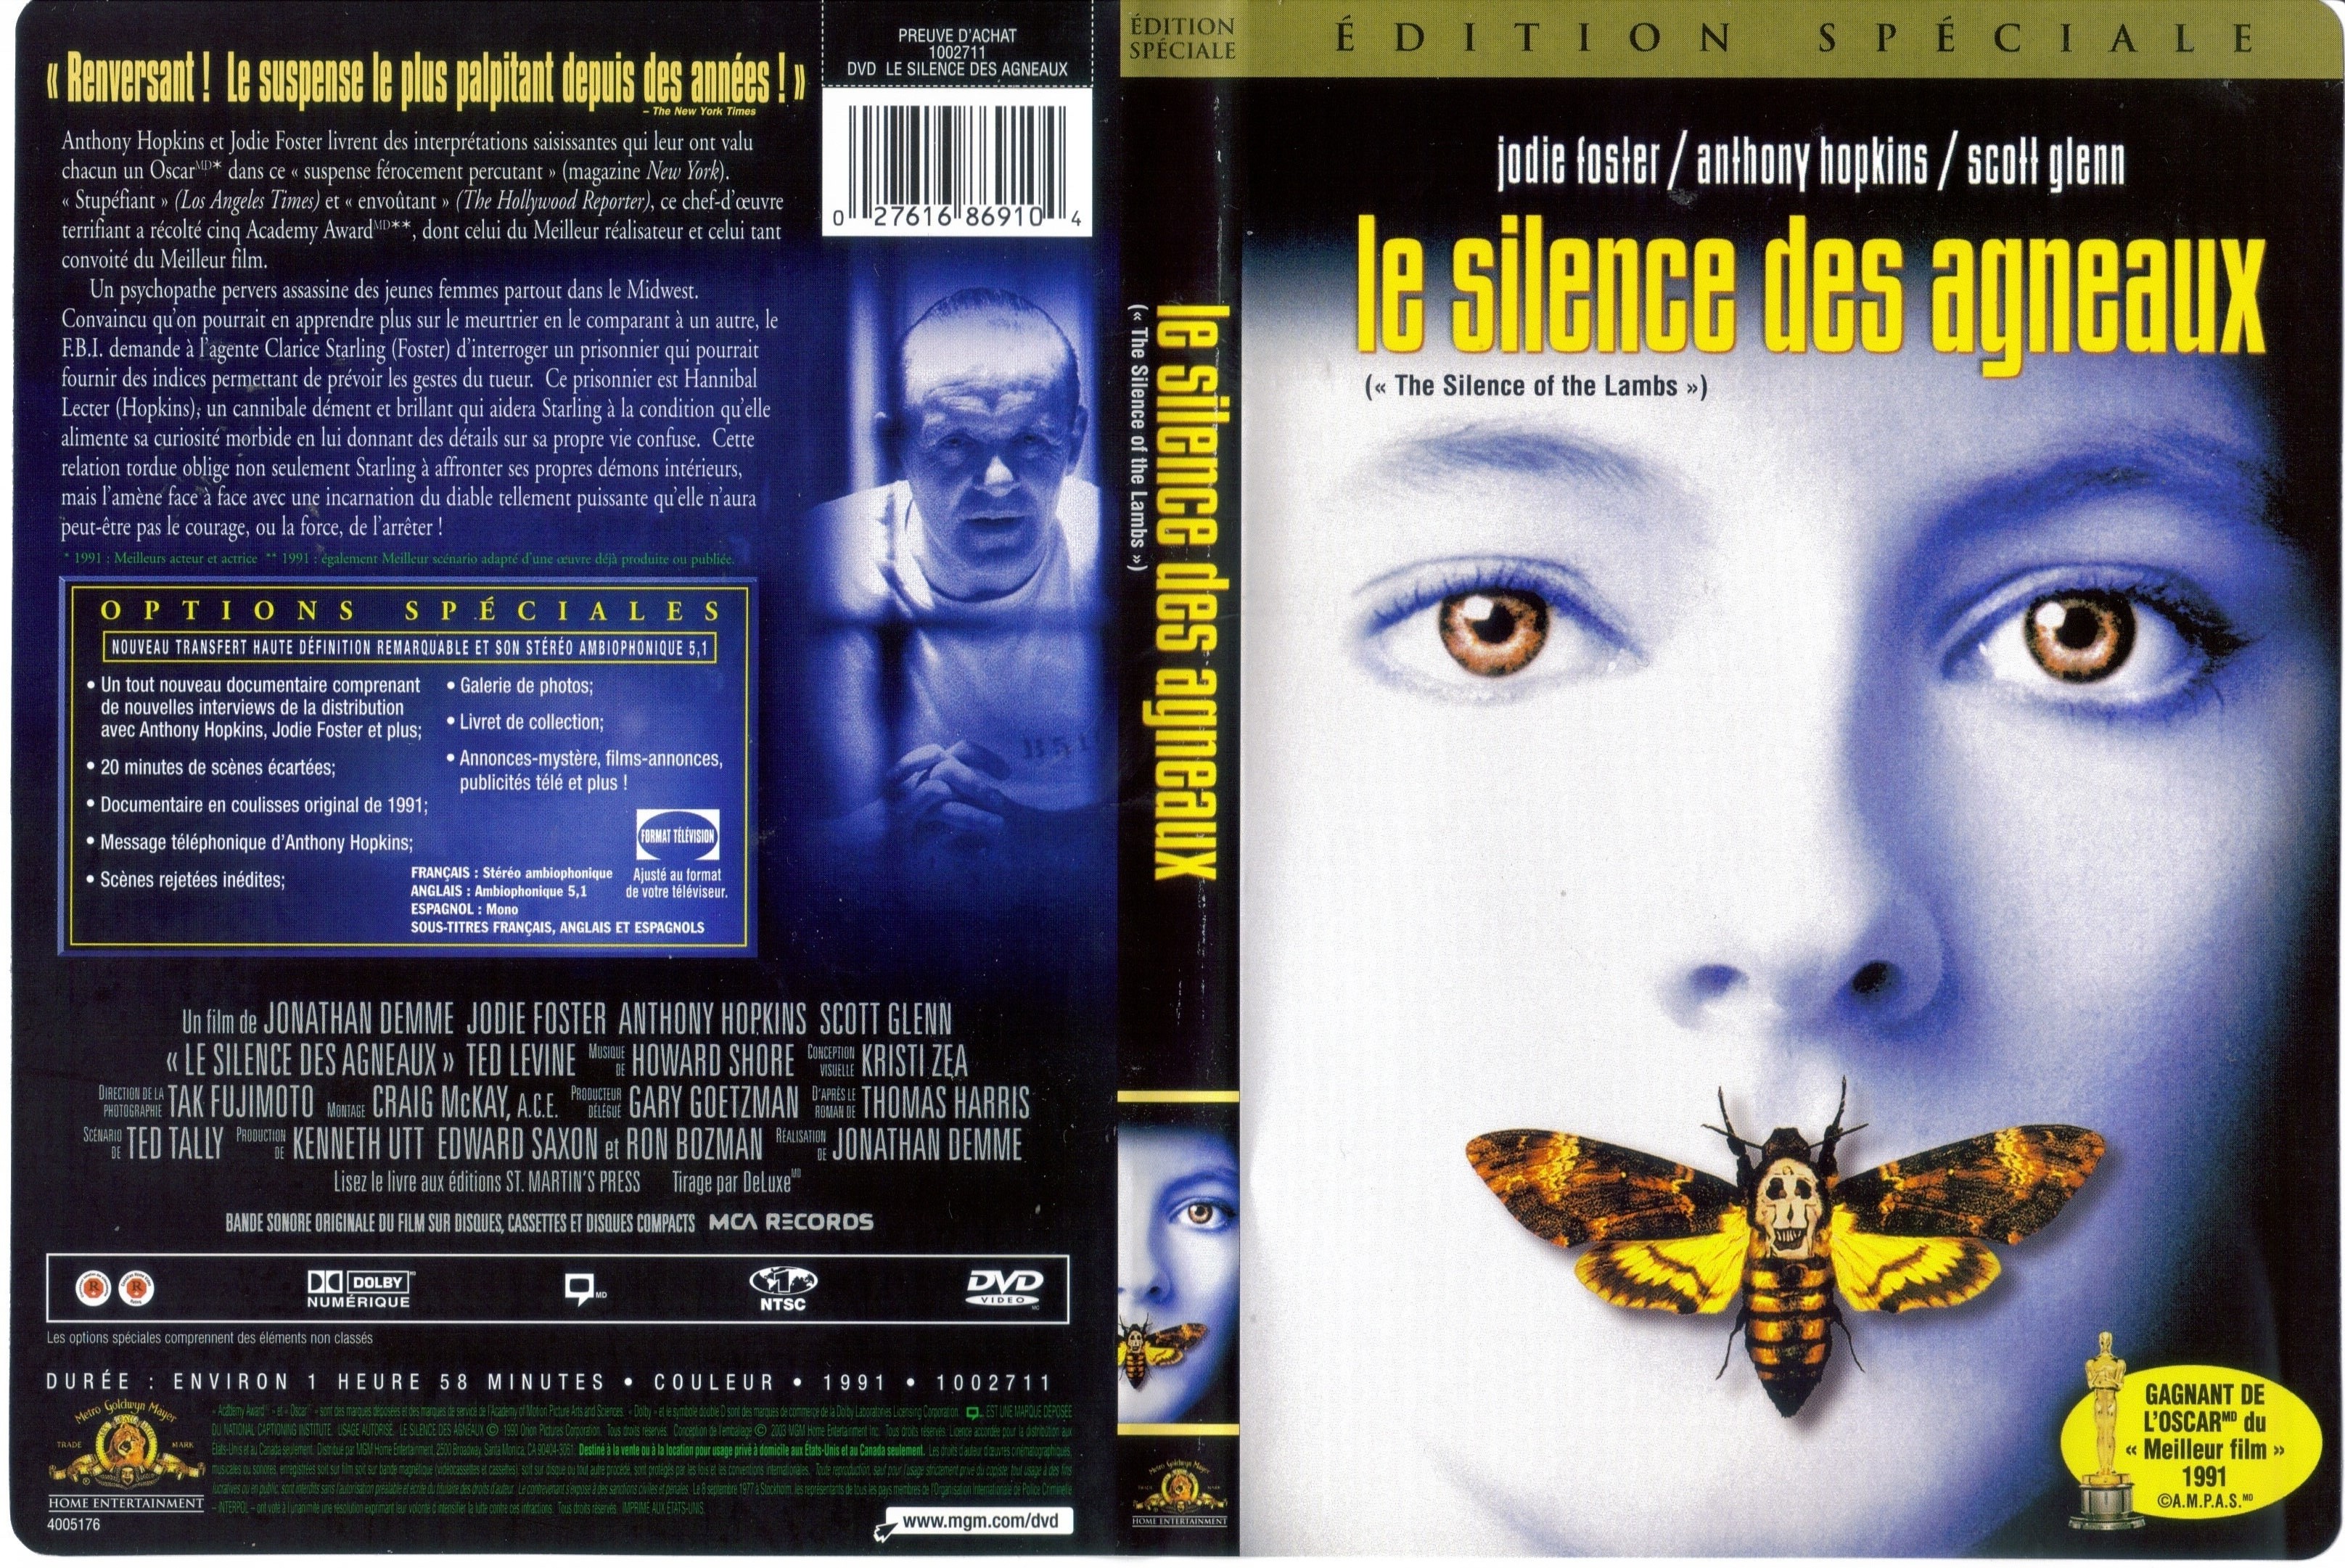 Jaquette DVD Le silence des agneaux - The silence of the lambs (Canadienne)